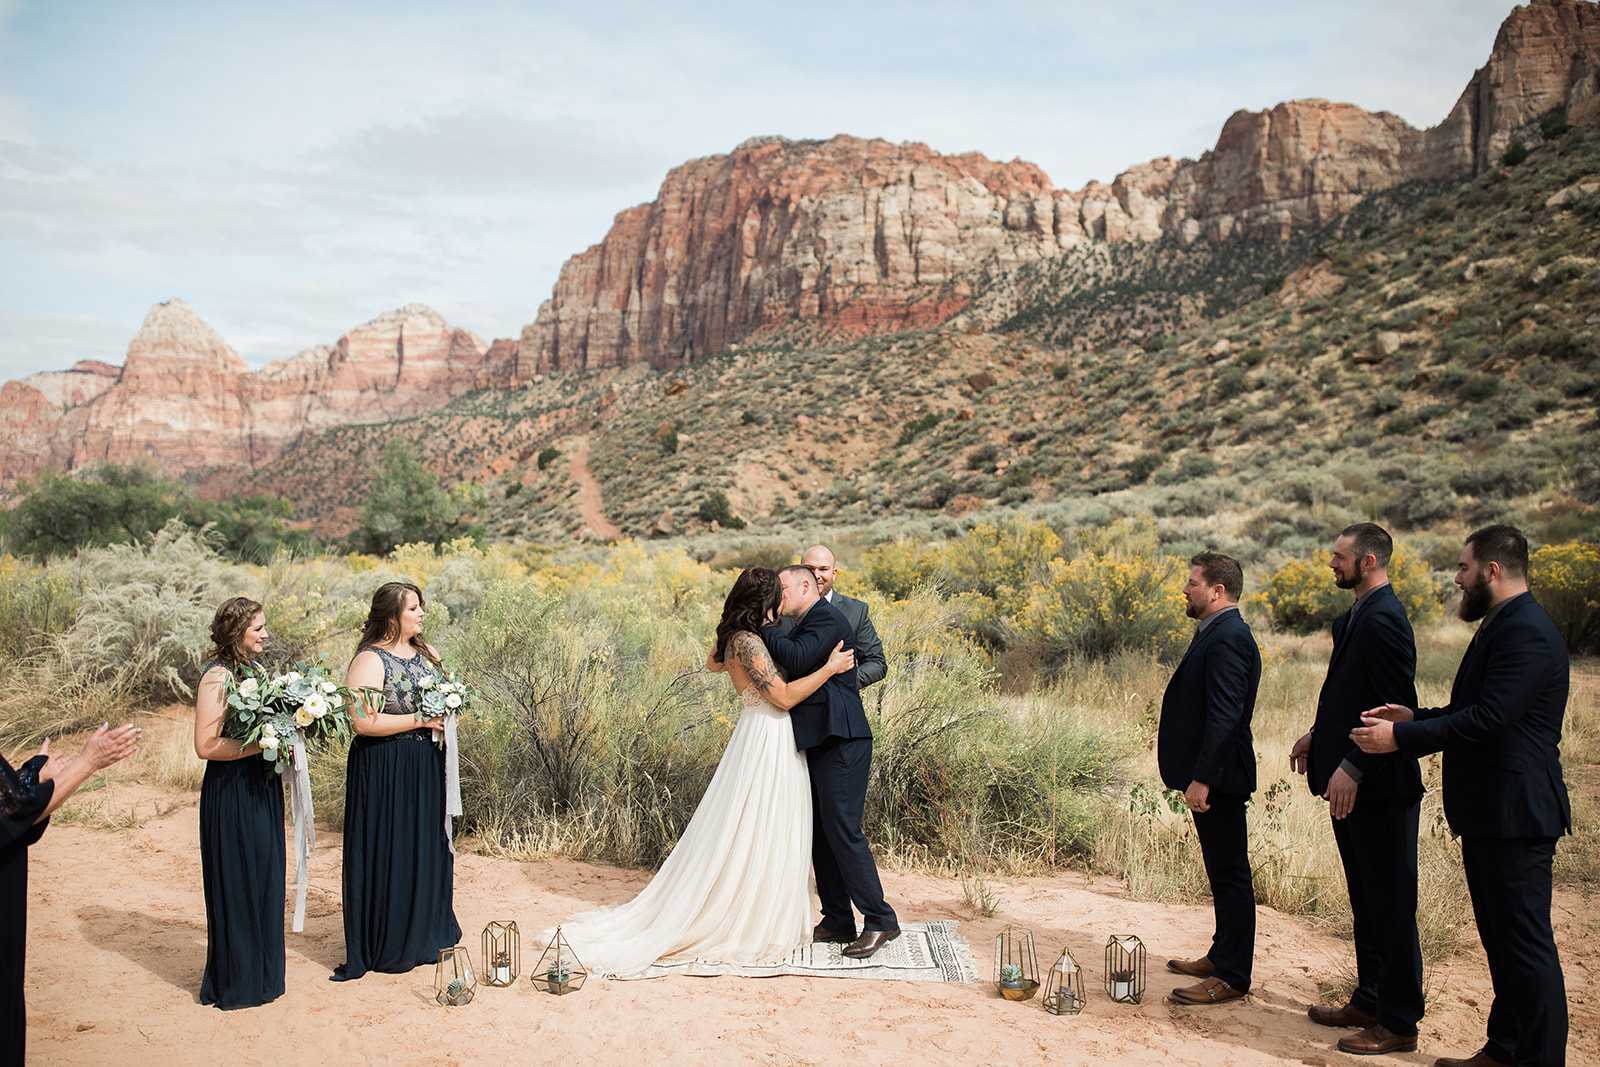 first kiss in front of dramatic Zion mountains